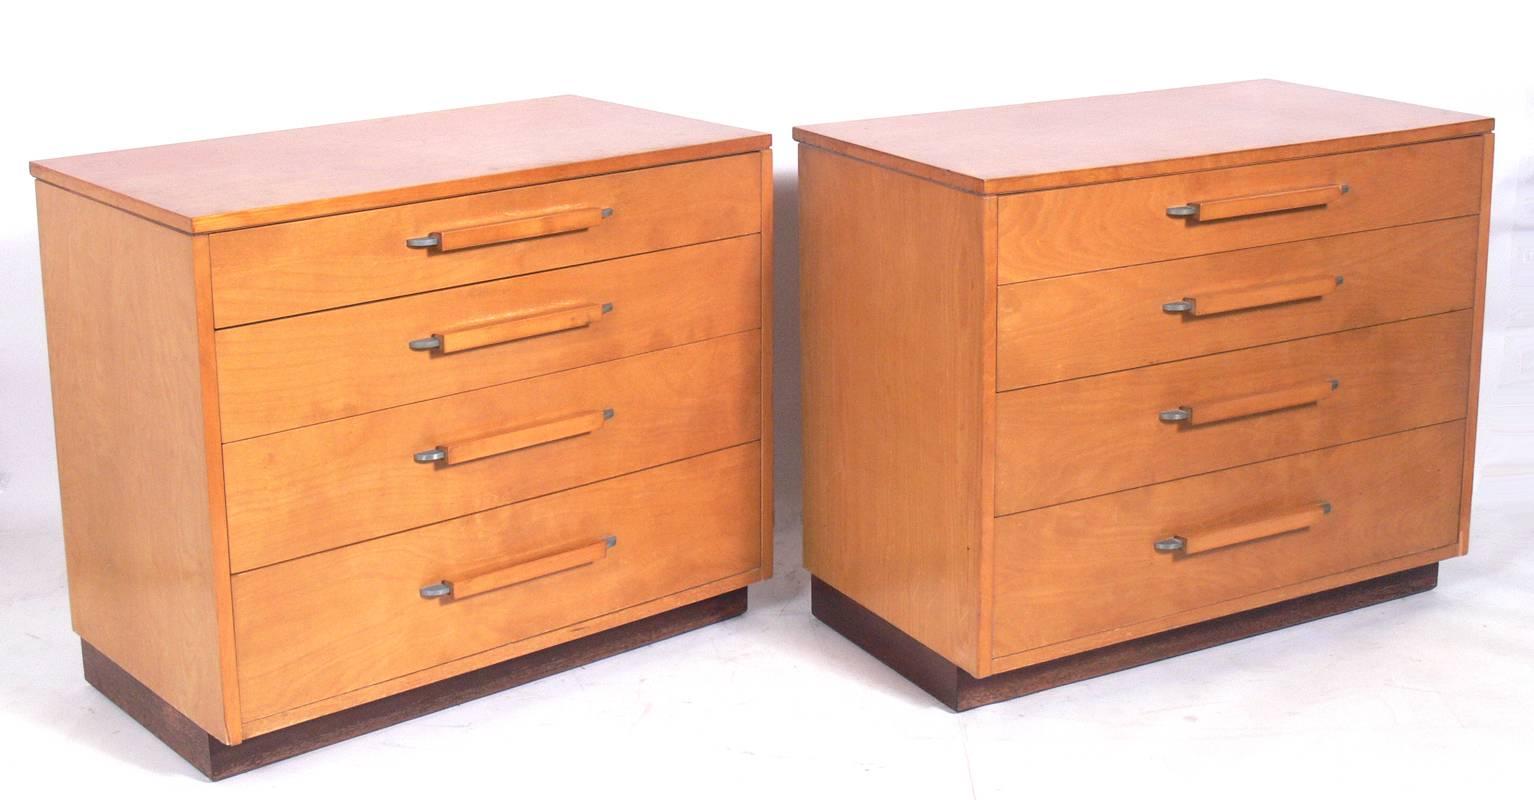 Pair of modern birch chests or dressers, designed by Eliel Saarinen and his daughter Pipsan Saarinen Swanson for the Johnson Furniture Company, American, circa 1940s. 

In 1937 they designed these pieces as part of the 